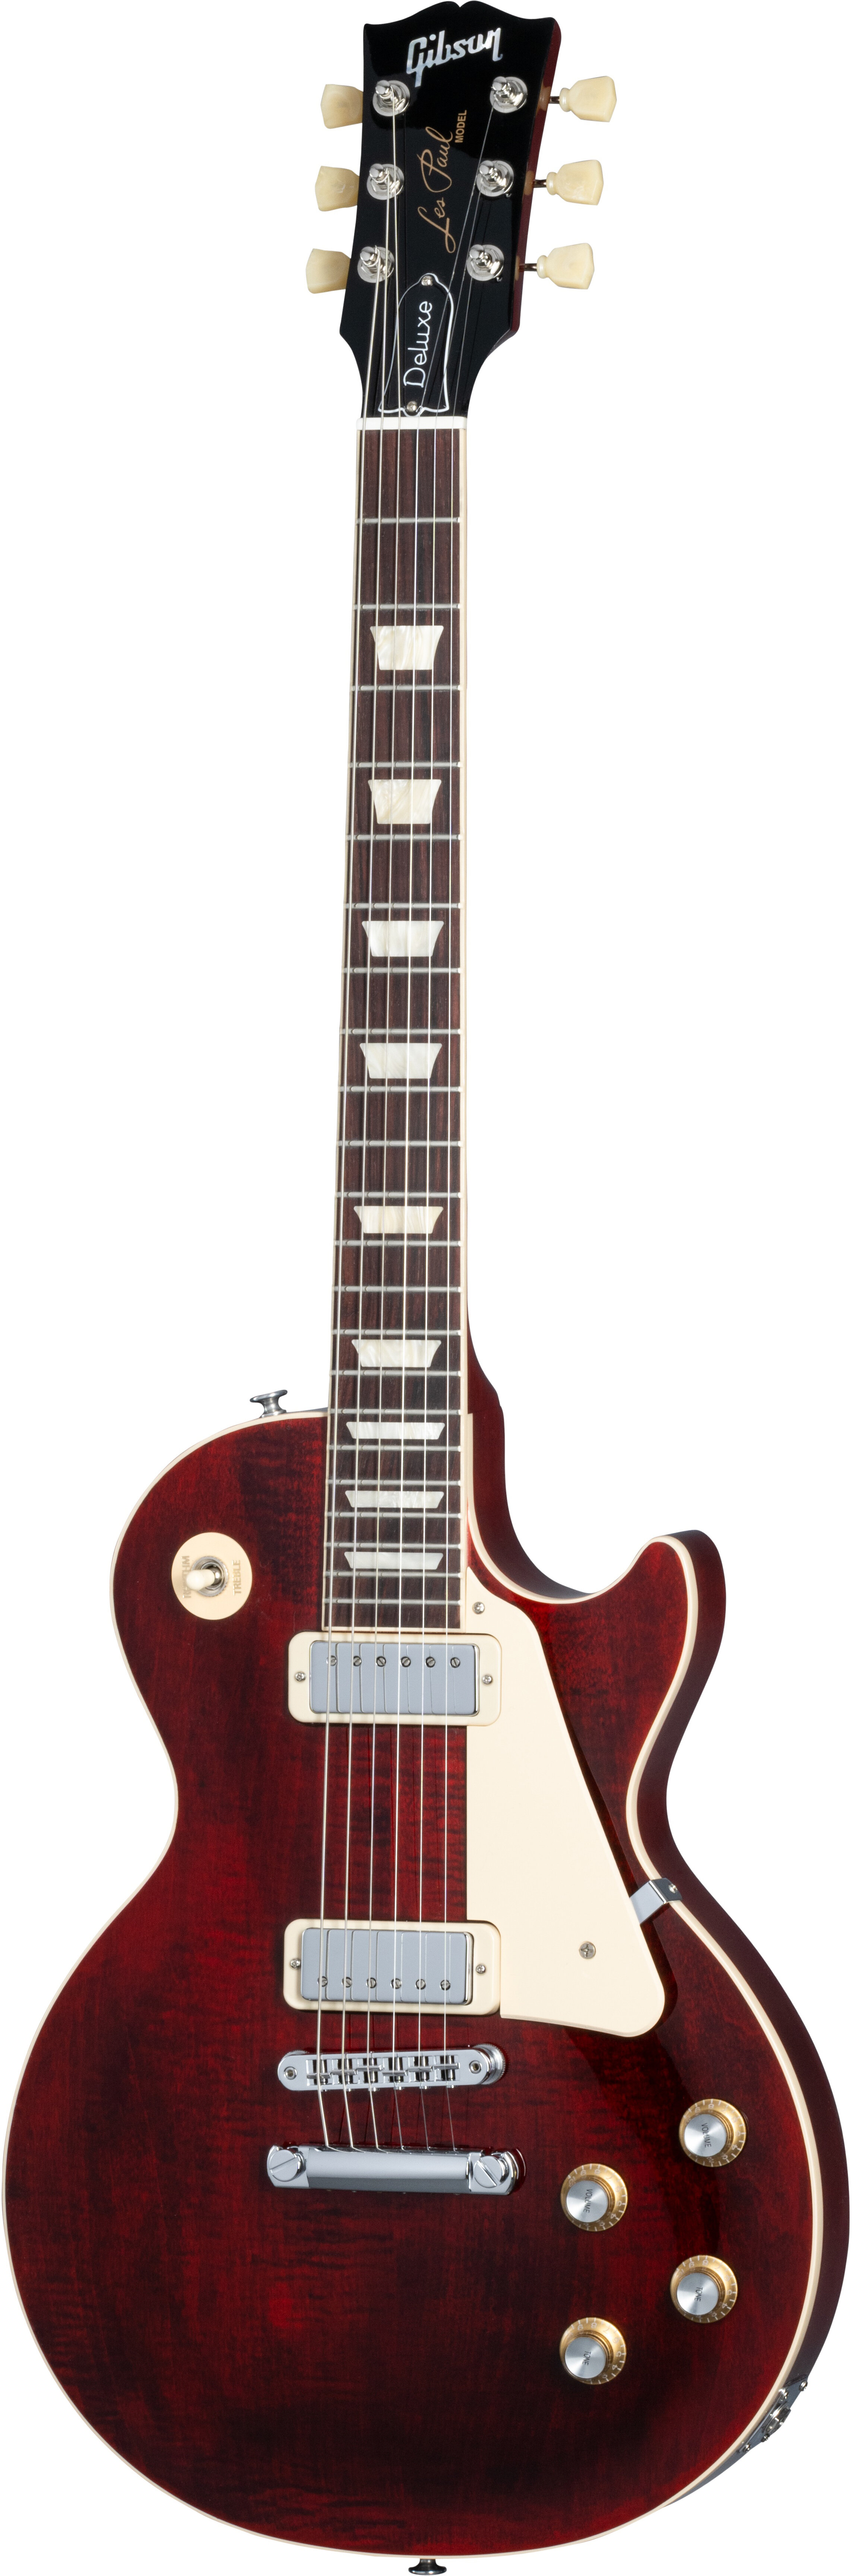 Gibson Les Paul Deluxe 70s Wine Red W/C -  LPDX00WRCH1